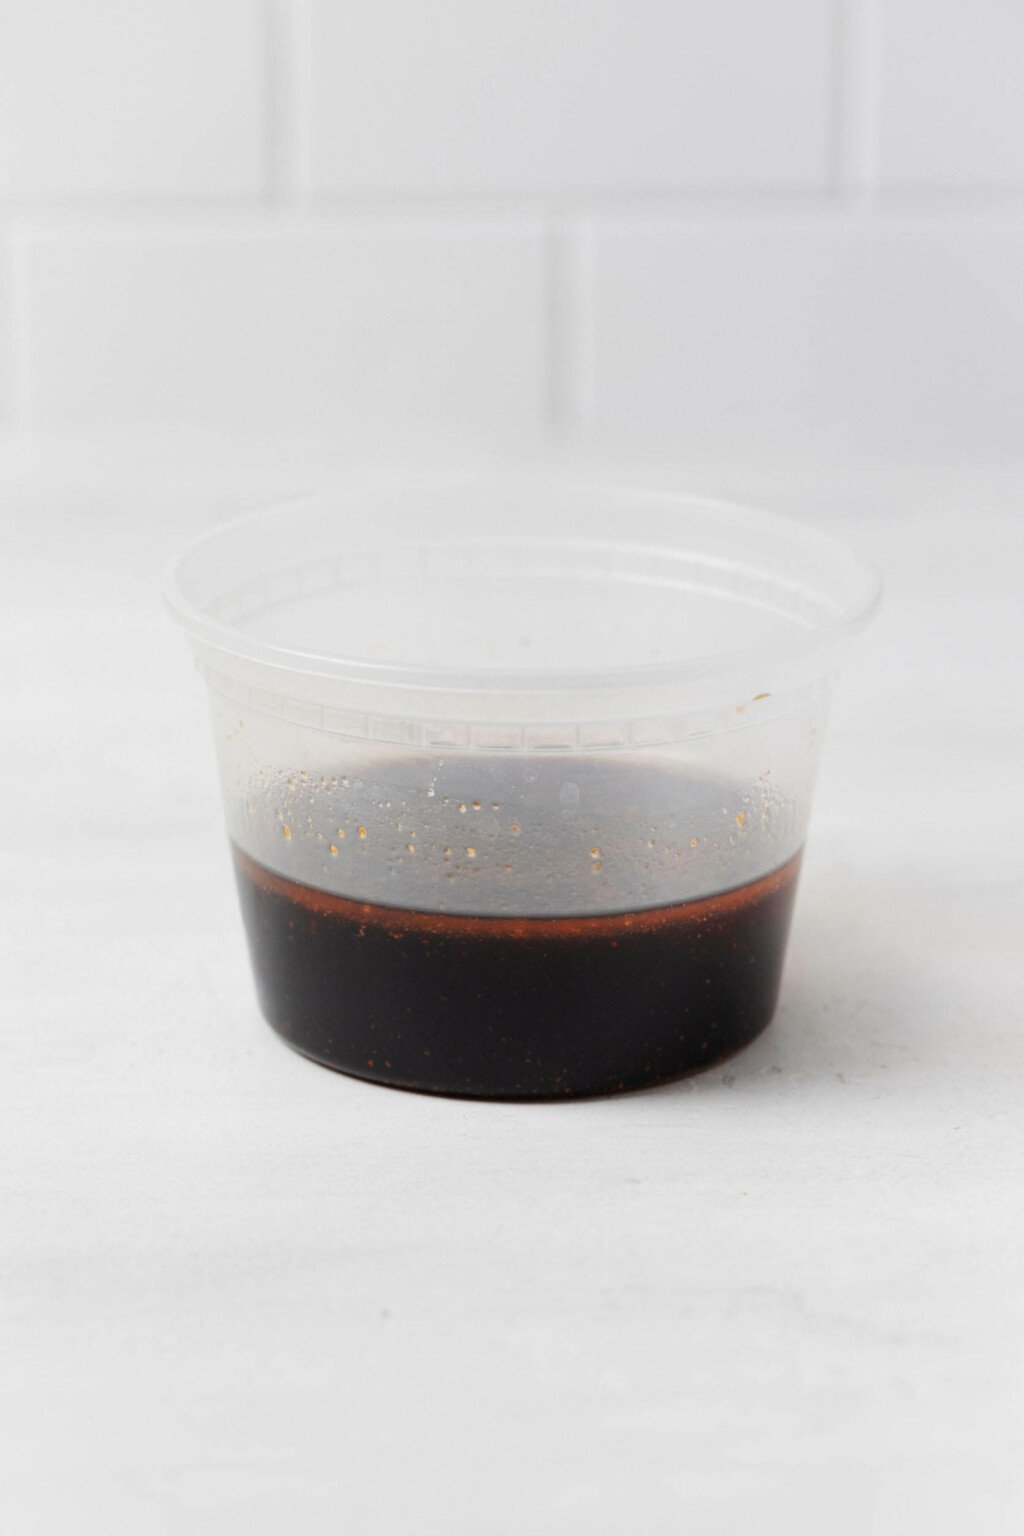 A clear, round plastic container holds a brown marinade.